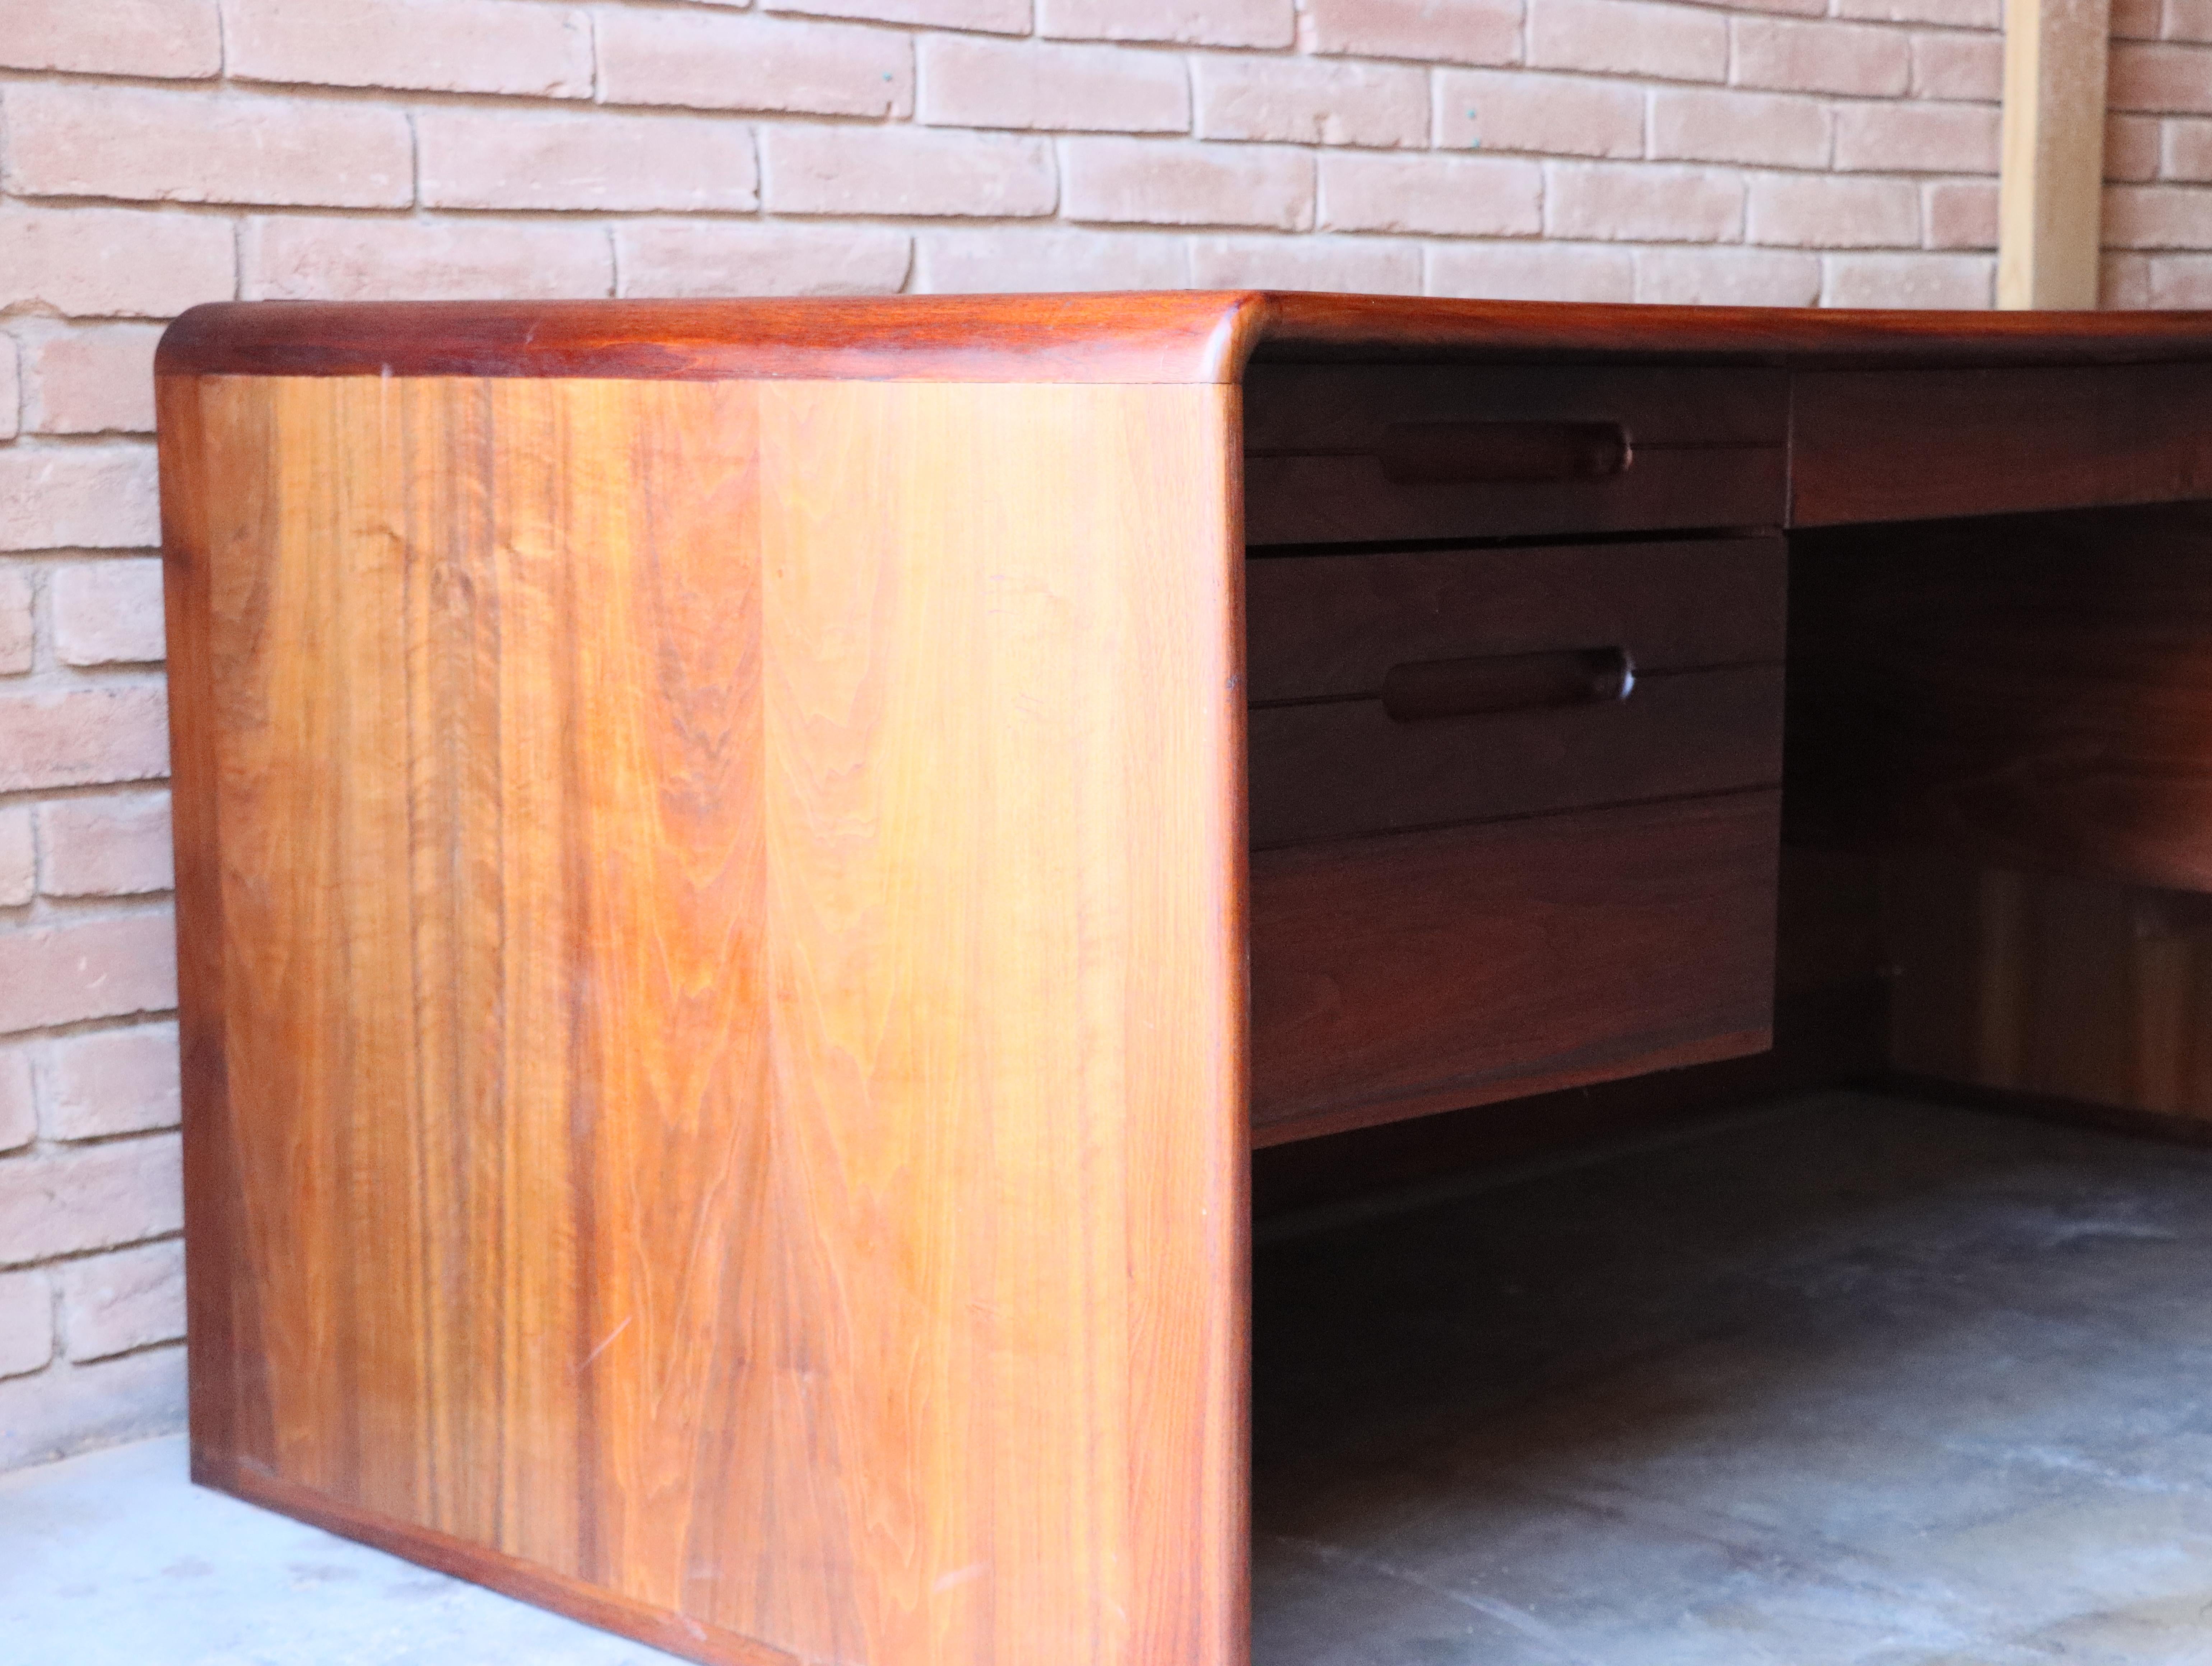 Solid Walnut and Burlwood Desk by Lou Hodges, California Design, 1970s For Sale 5